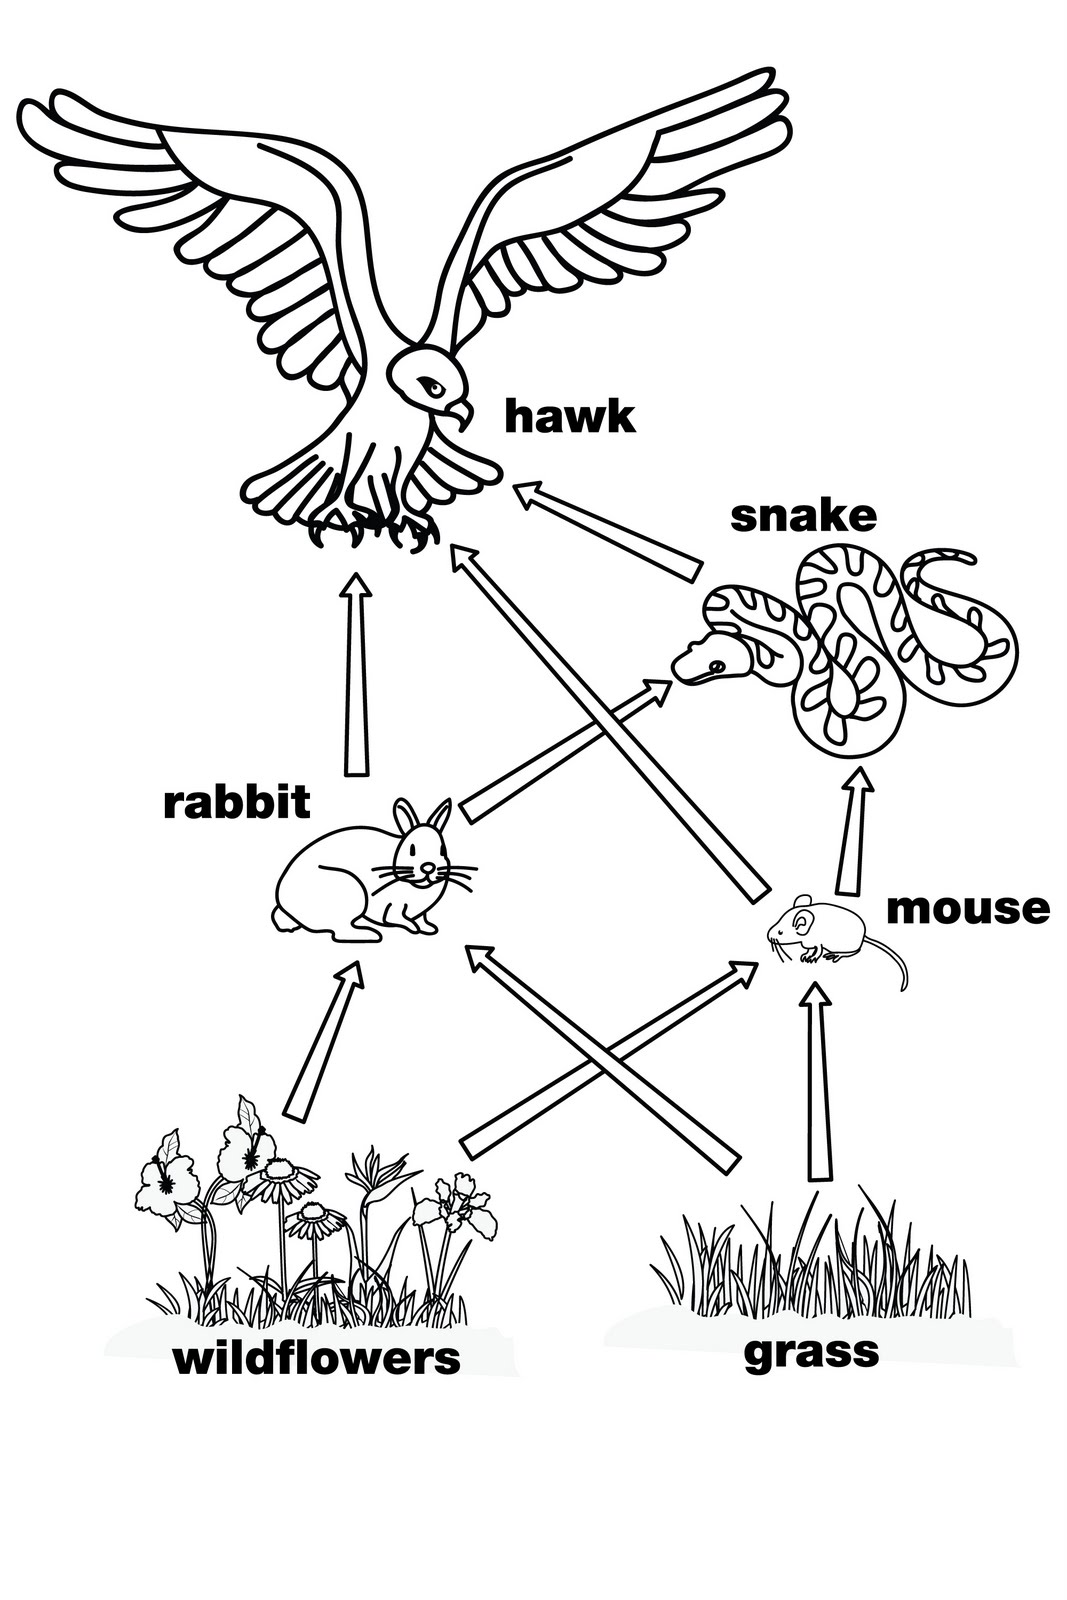 Food Web Coloring Pages Image